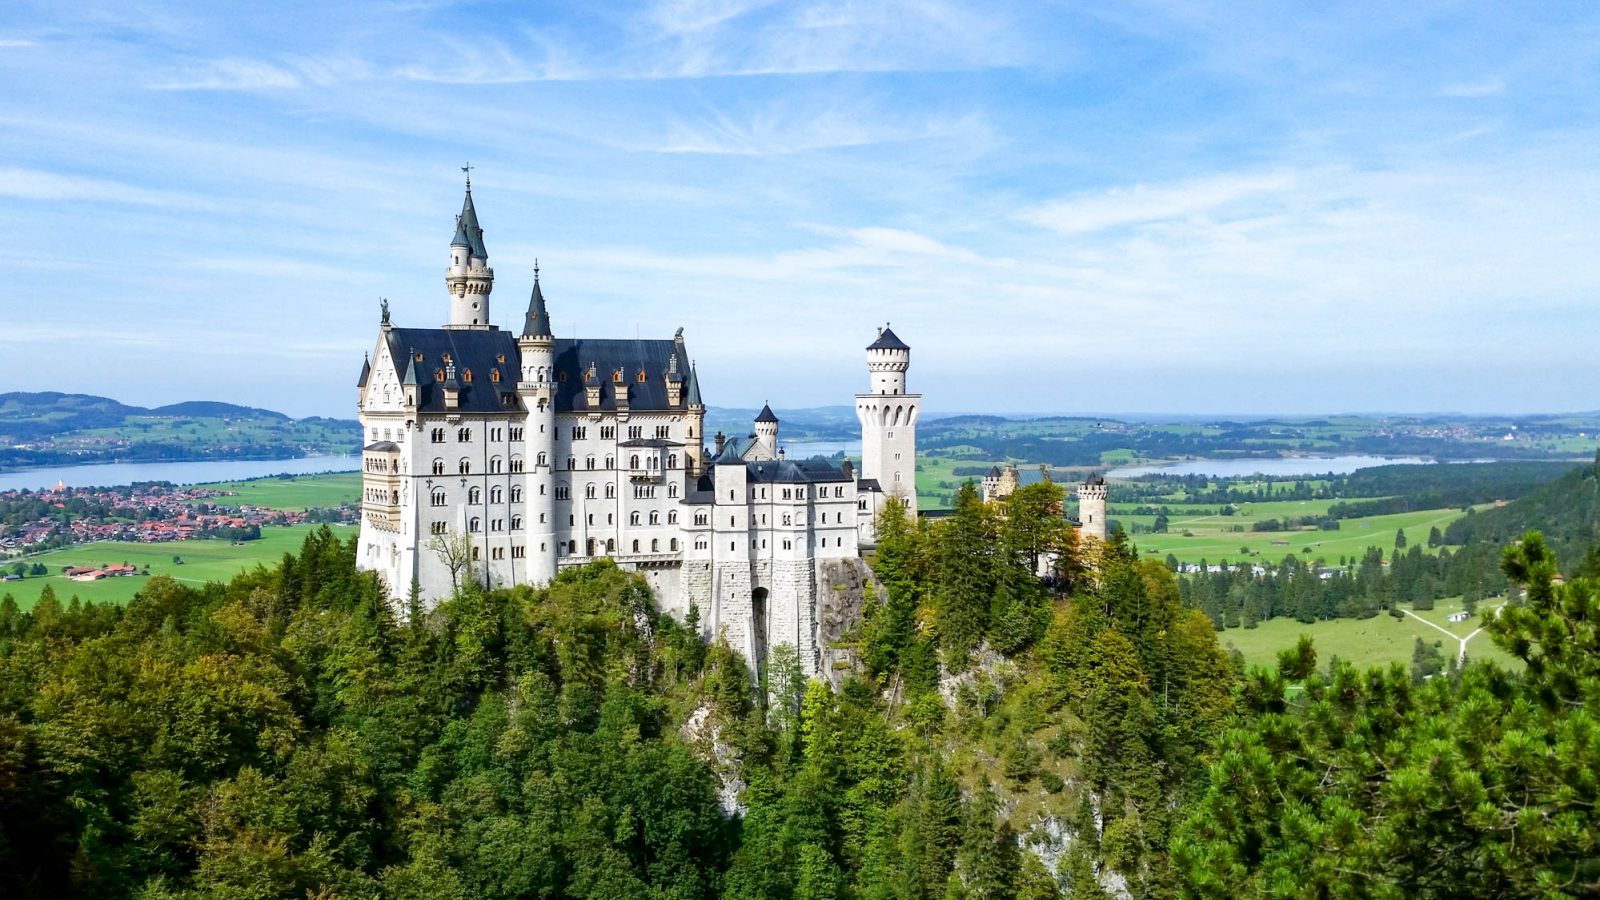 10 Crucial Tips to Visit Neuschwanstein Castle Skillfully and Worry-Free | Tips for visiting Neuschwanstein Castle in Bavaria, Germany | Neuschwanstein Castle tour tickets #hohenschwangau #neuschwanstein #castle #bavaria #germany #mywanderlustylife